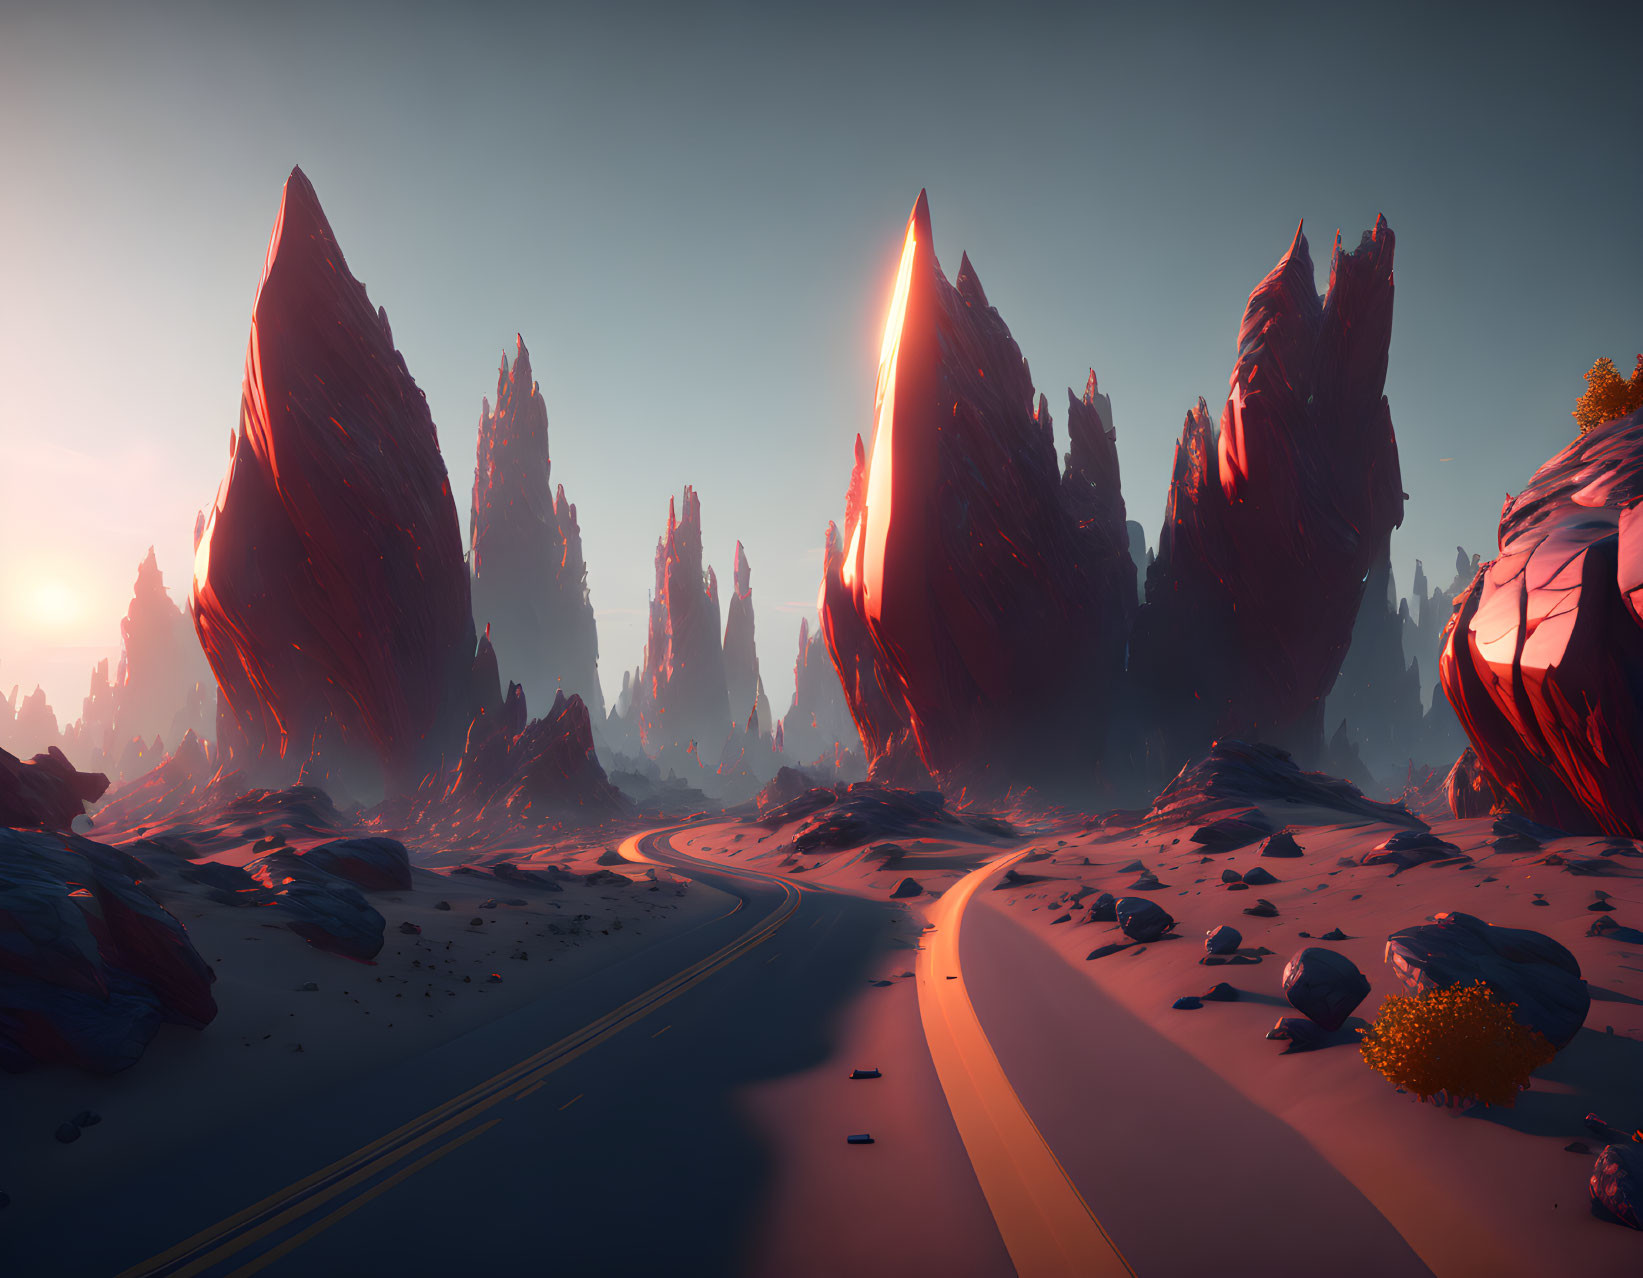 Surreal landscape with red rock formations, winding road, and warm sunset.